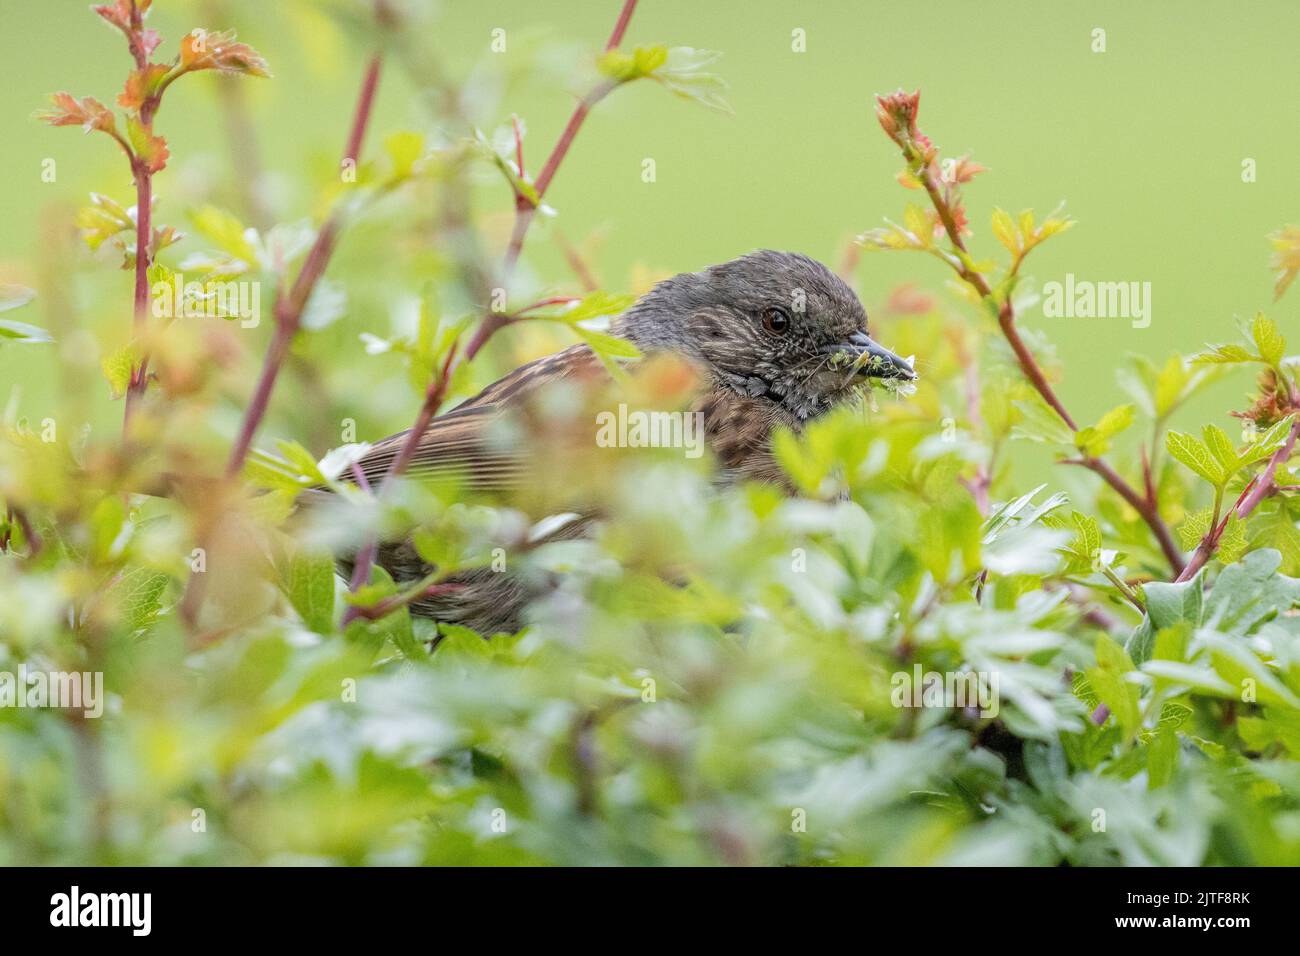 Dunnock (Prunella modularis) with greenfly insects in its beak in a hedgerow ready to give young food, UK wildlife Stock Photo